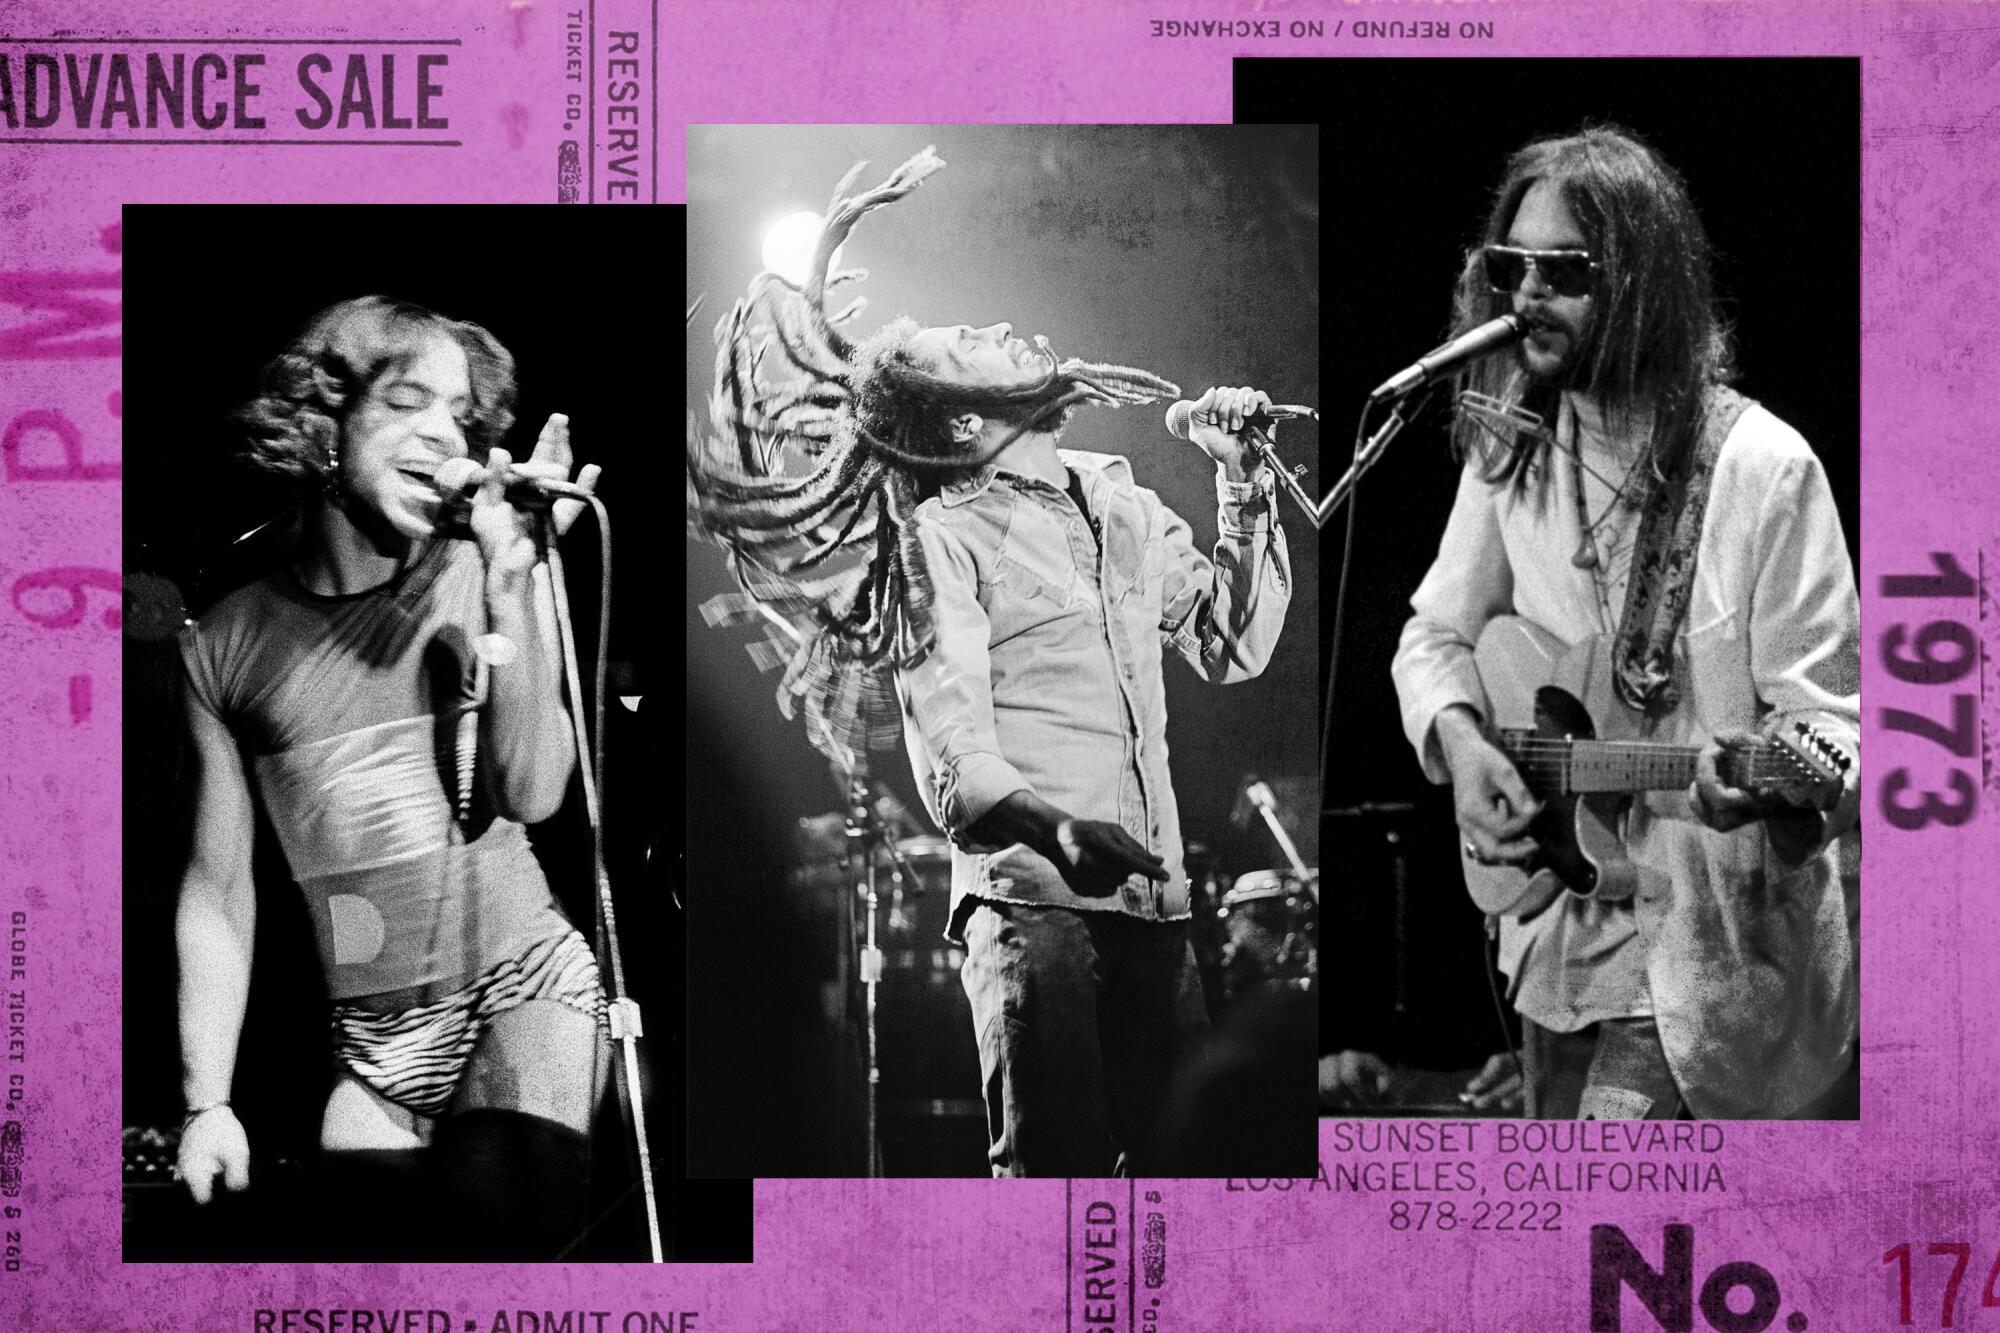 Prince, Bob Marley and Neil Young in a photo illustration